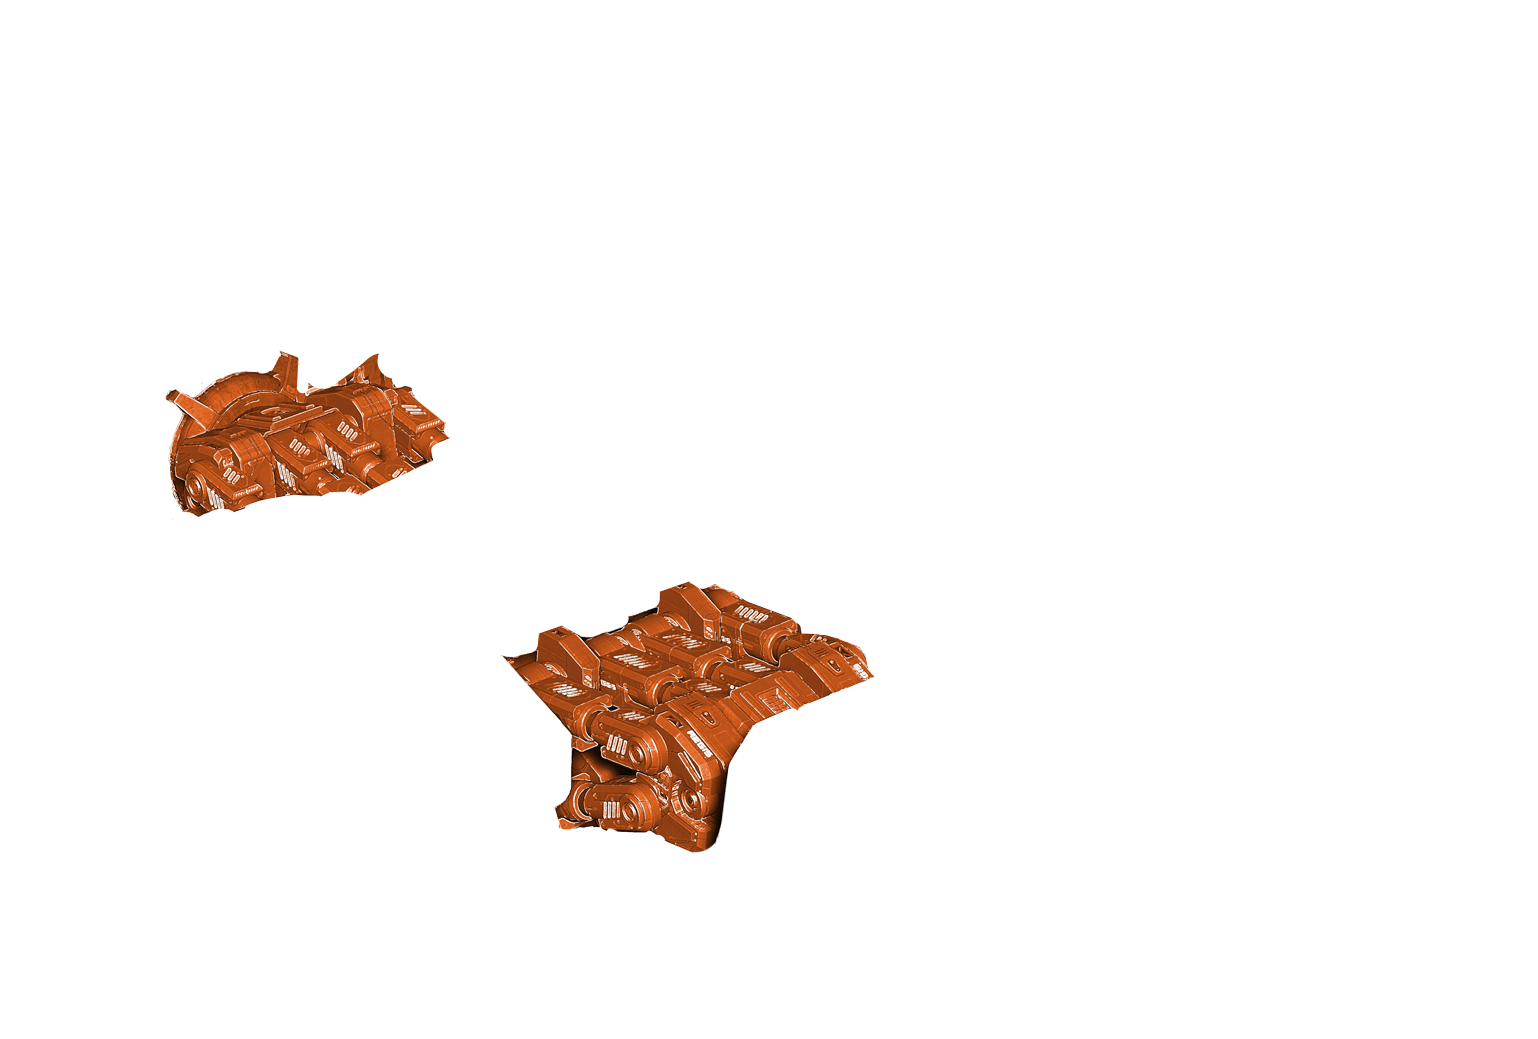 Artistic view of "Reclaimer"